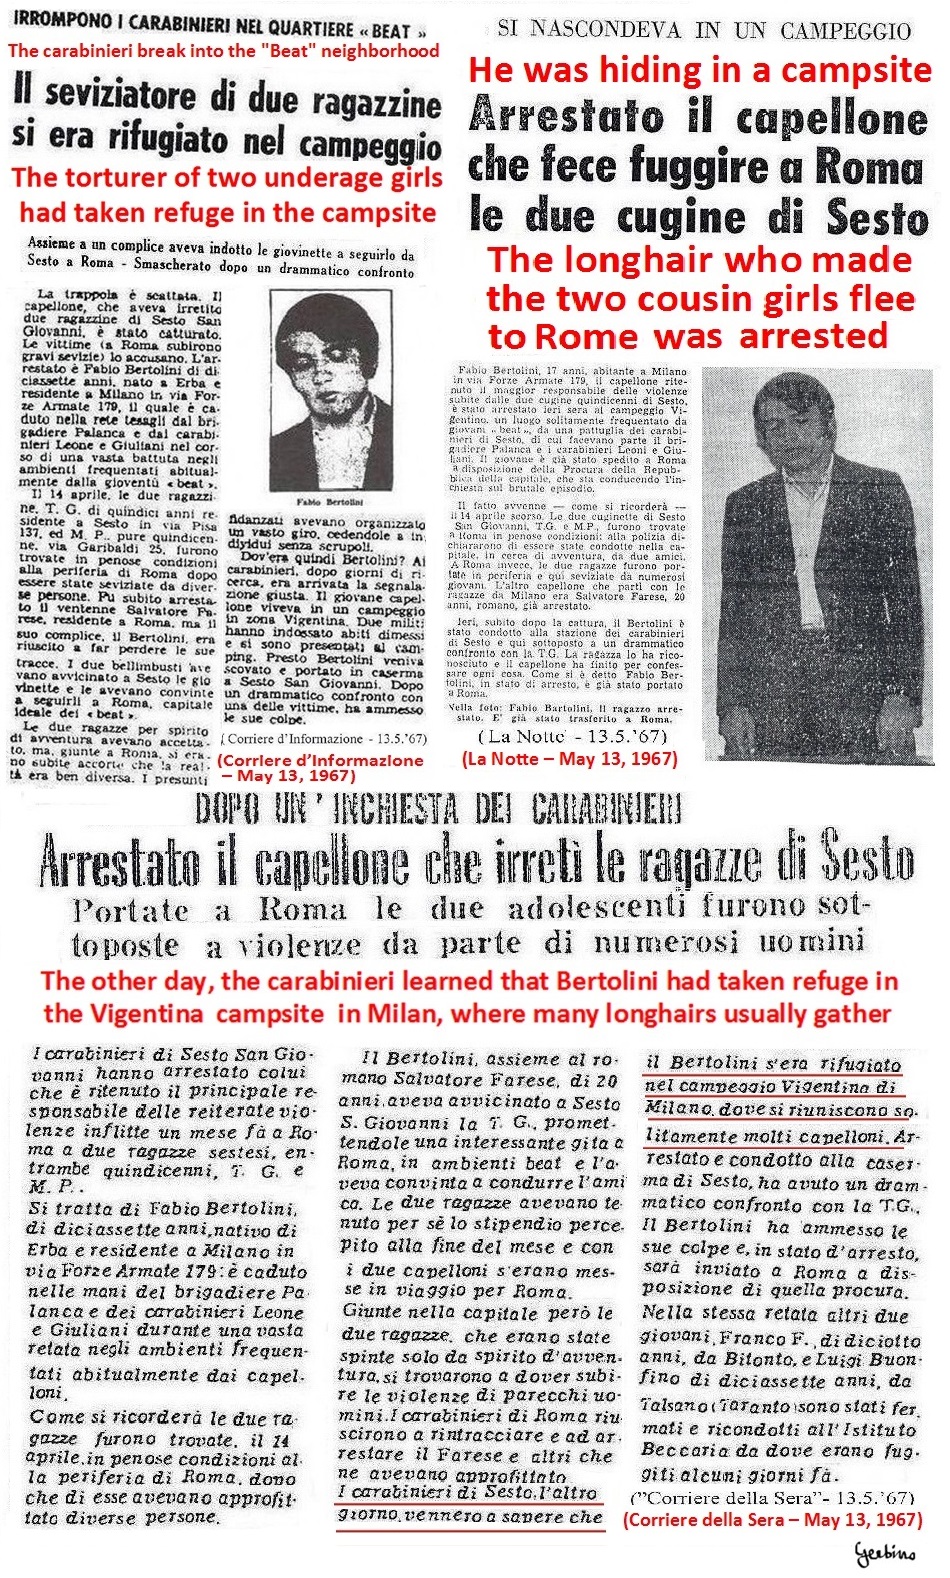 Actually, Fabio Bertolini had been arrested by the carabinieri in a bar of the Castello Sforzesco's park  and not in Barbonia City.